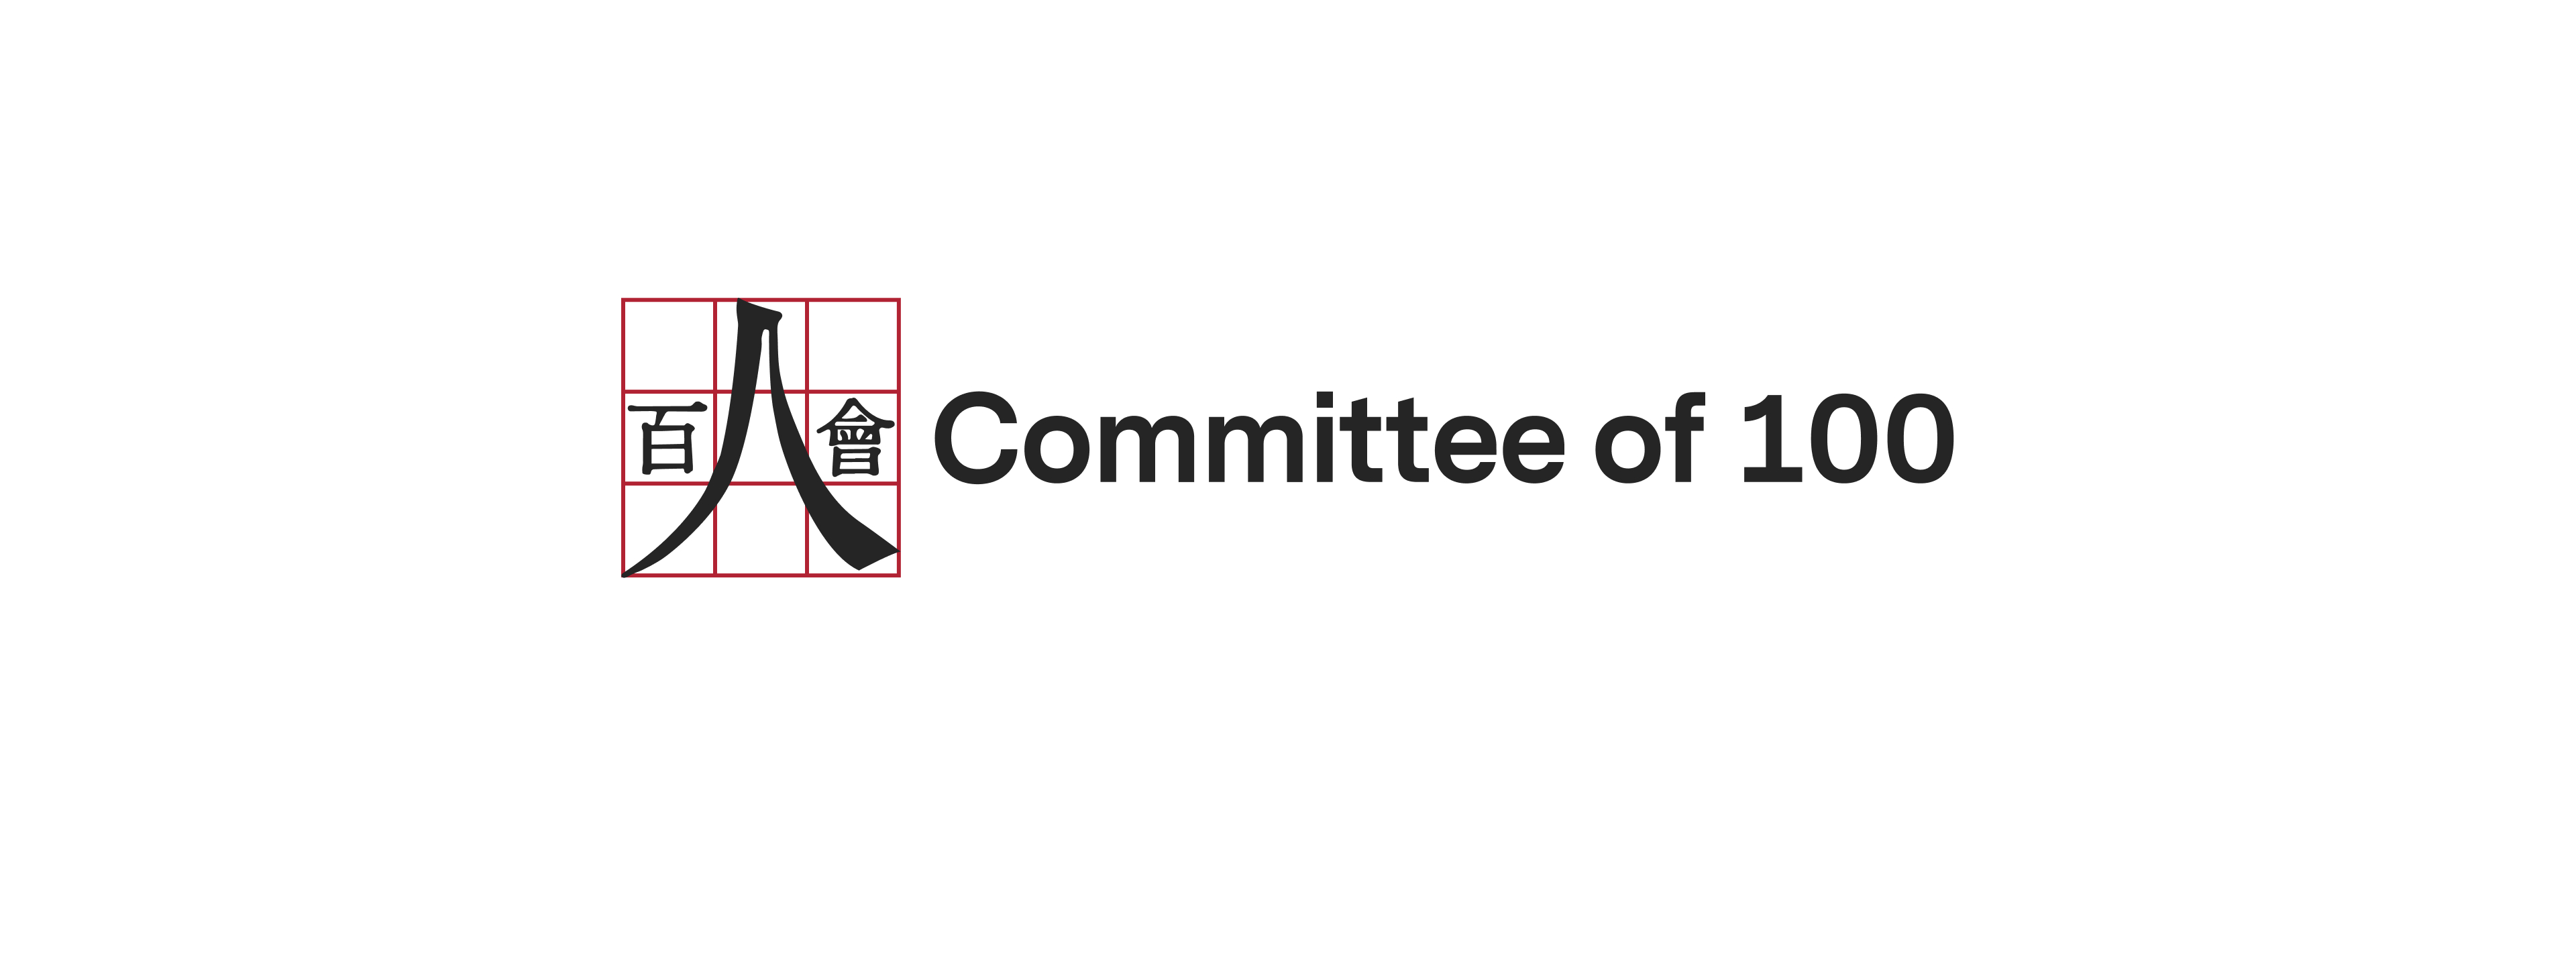 Committee of 100 Commends U.S. Justice Department for Greater Oversight on National Security Cases